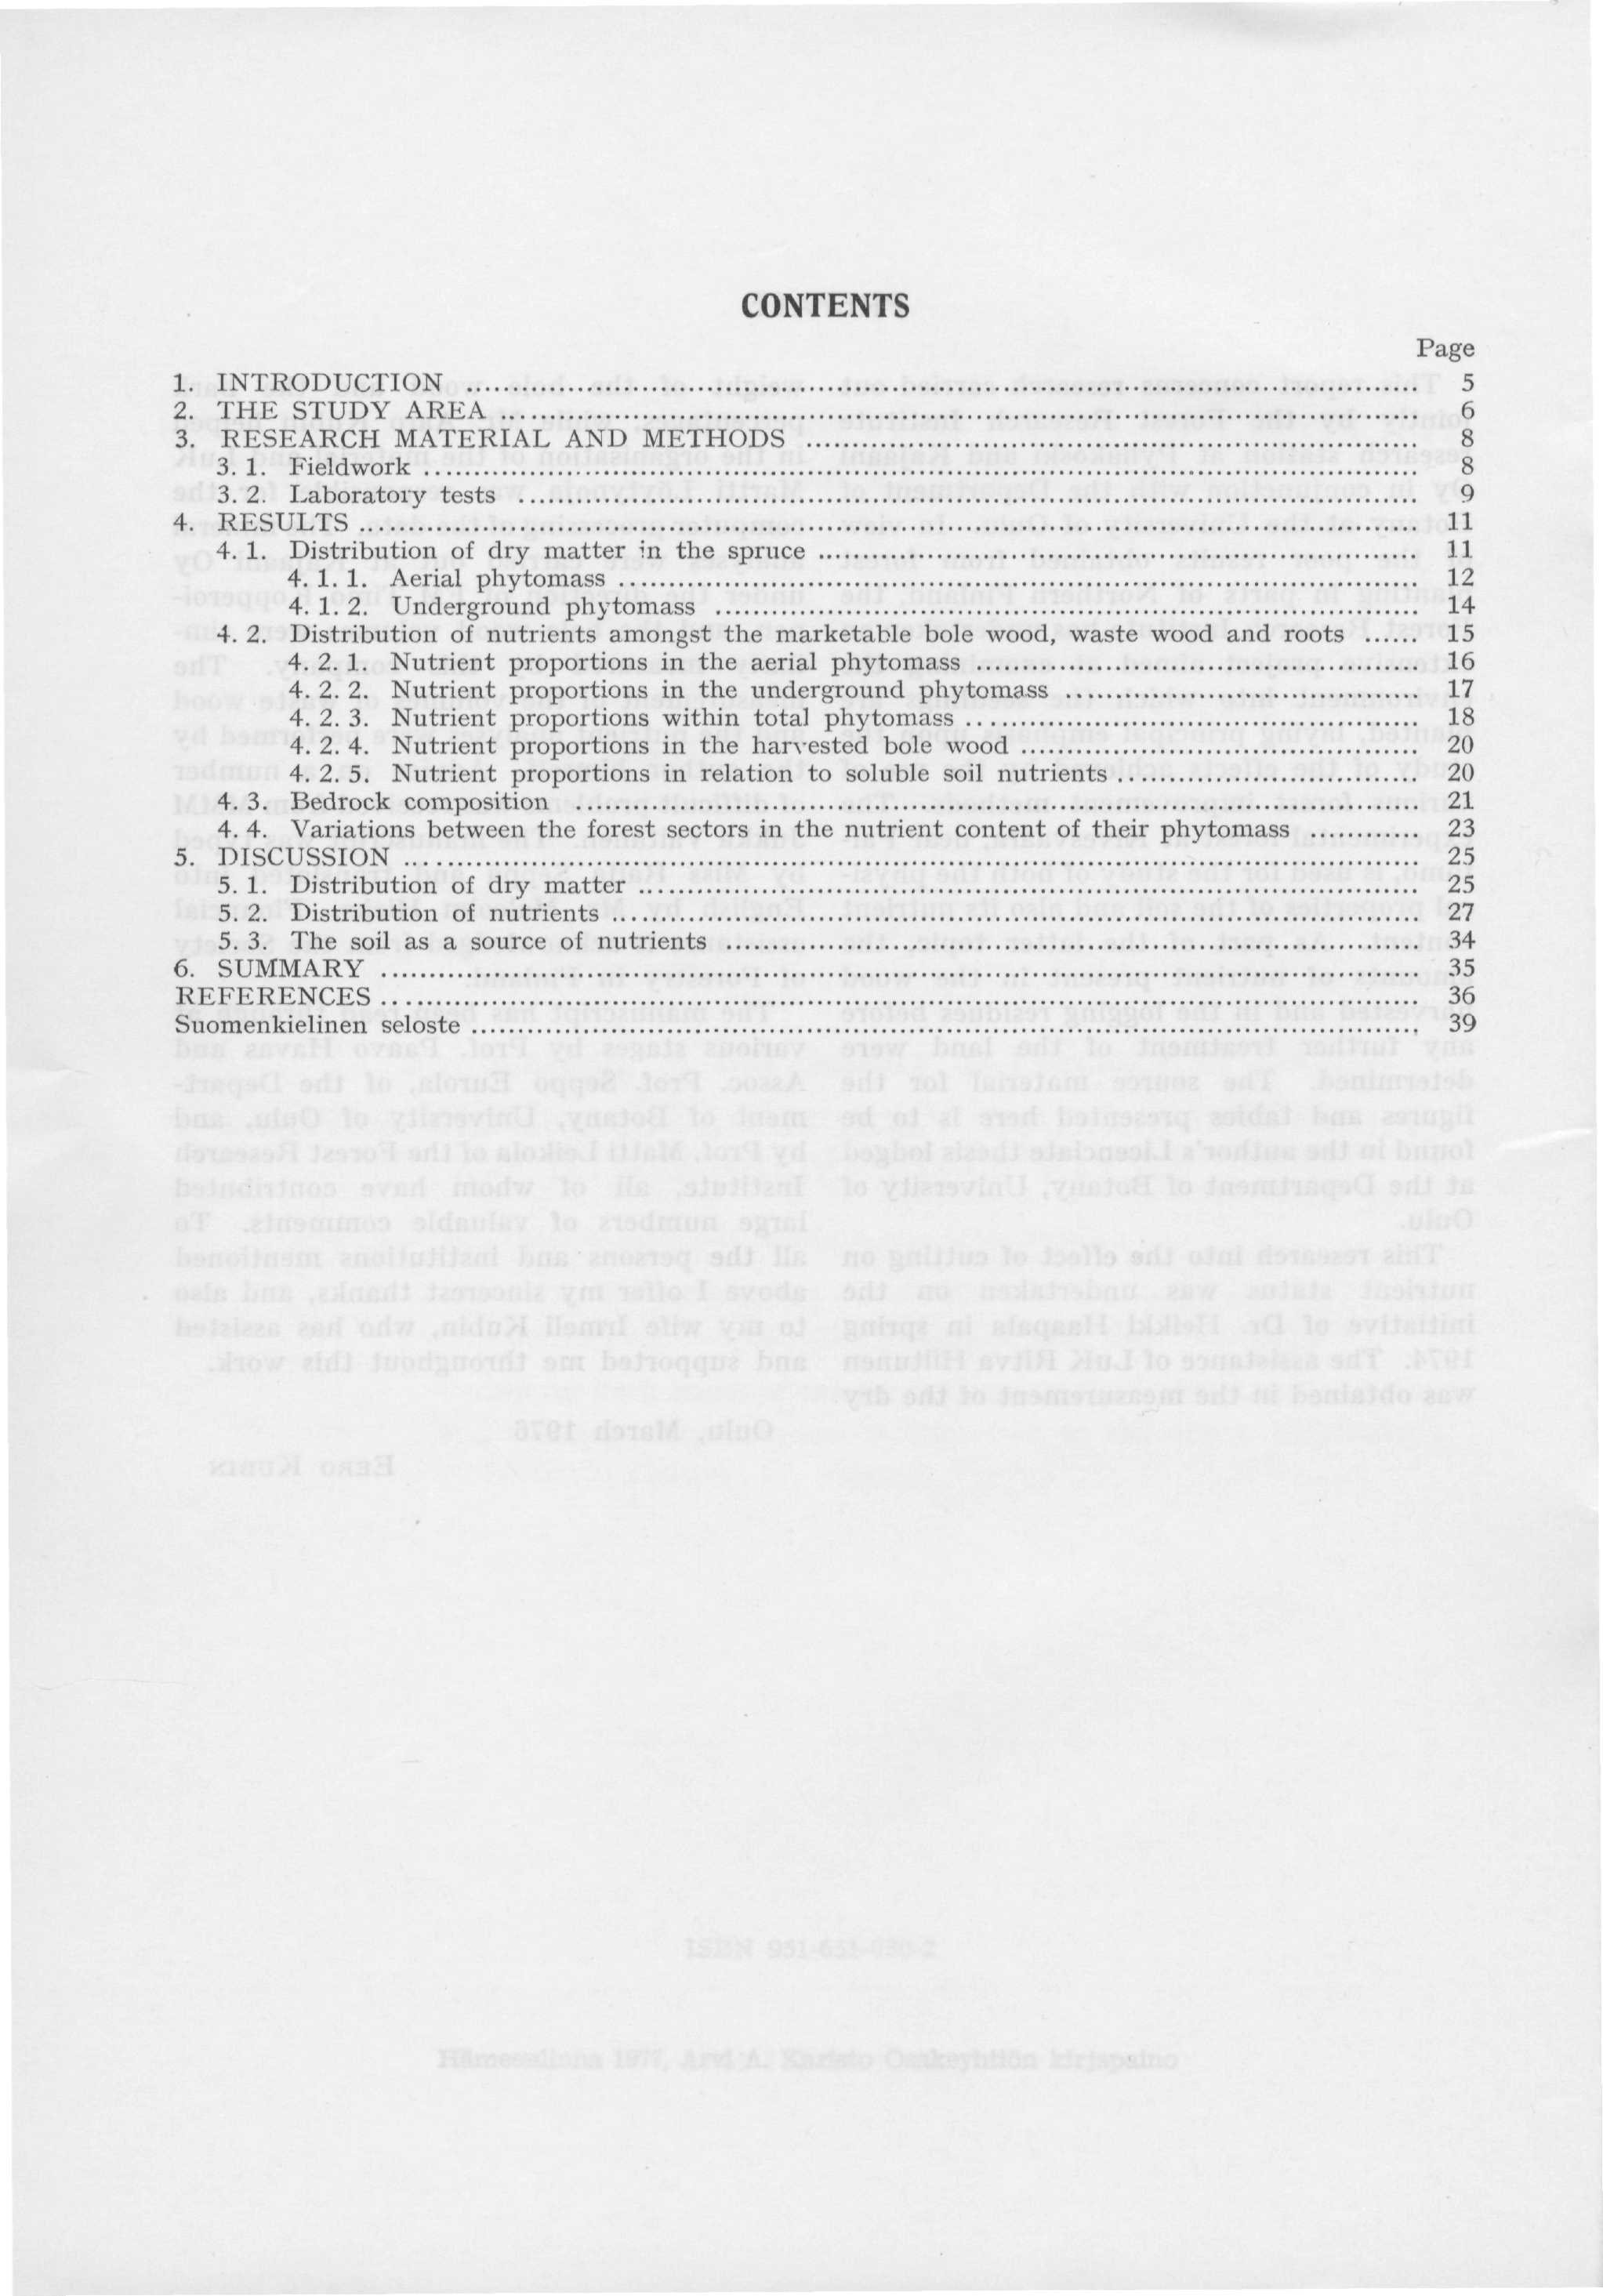 CONTENTS Page 1. INTRODUCTION 5 2. THE STUDY AREA 6 3. RESEARCH MATERIAL AND METHODS 8 3. 1. Fieldwork 8 3.2. Laboratory tests 9 4. RESULTS 11 4. 1. Distribution of dry matter in the spruce 11 4.1.1. Aerial phytomass 12 4.